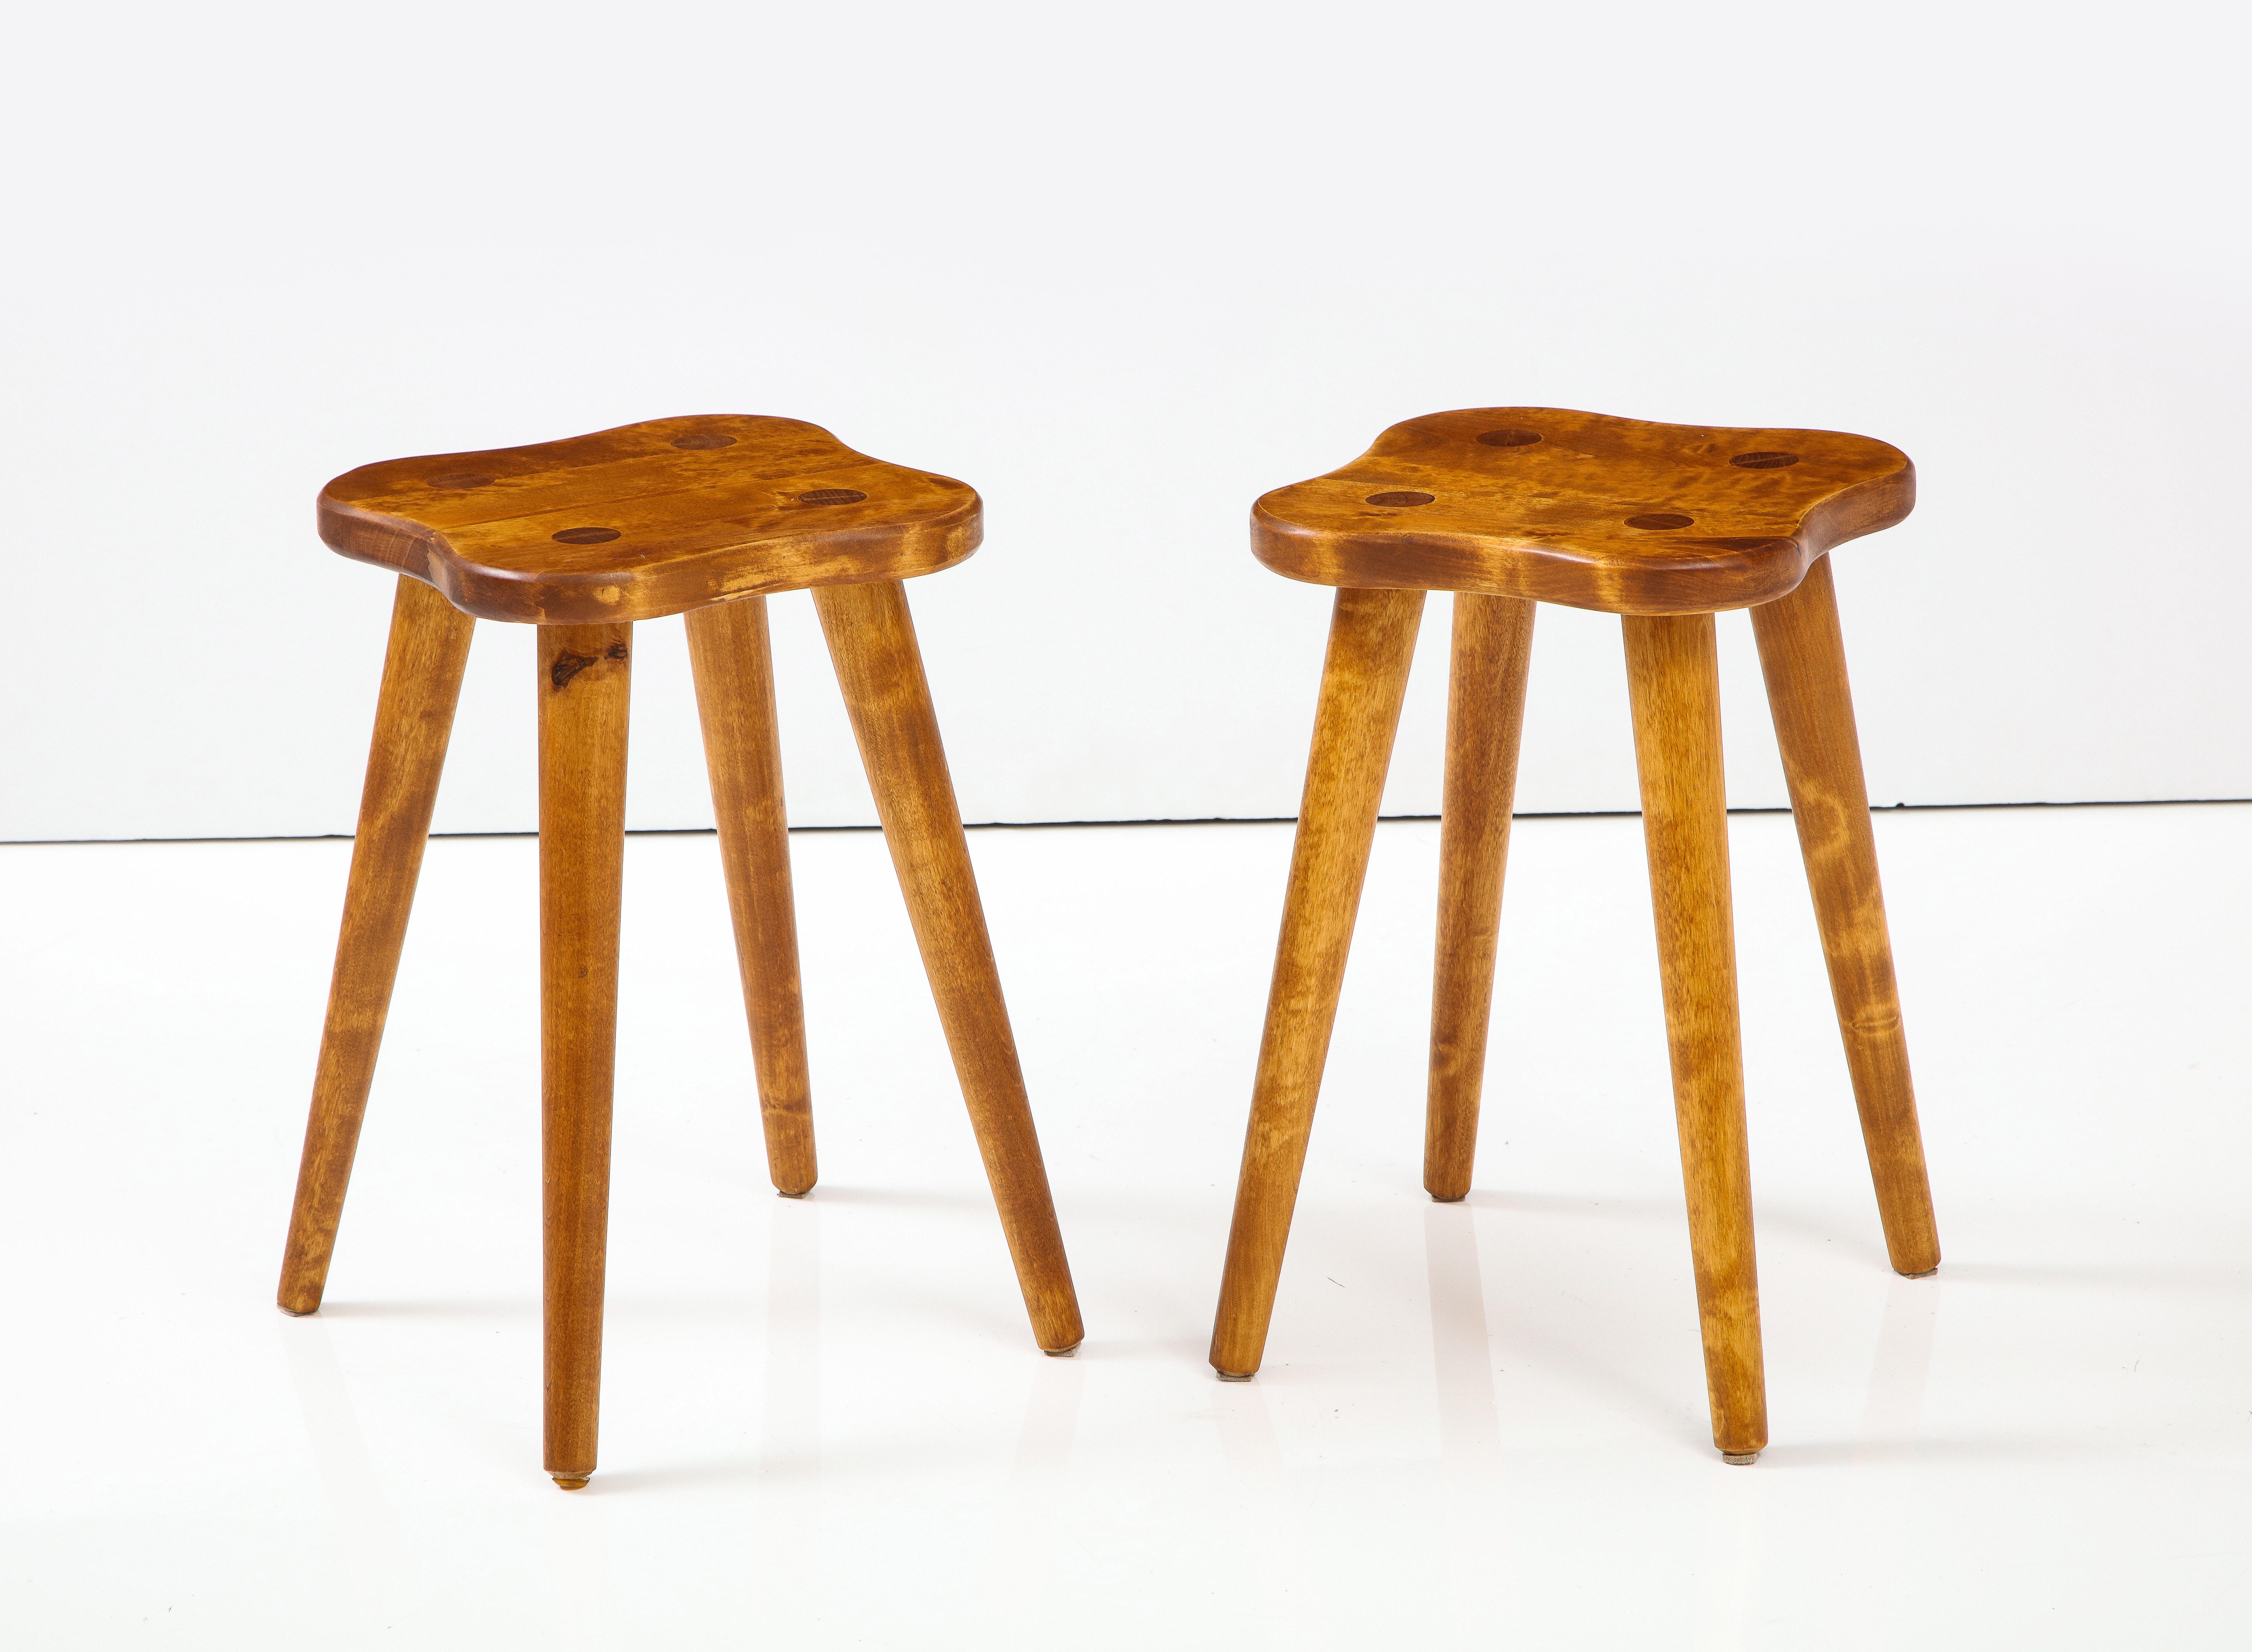 A pair of Swedish solid birch stools or side tables, circa 1960s, each with a incurved sided top raised on circular turned legs with seat dowels. Stain and wax finish. They would make nice little pull up stools or side tables.